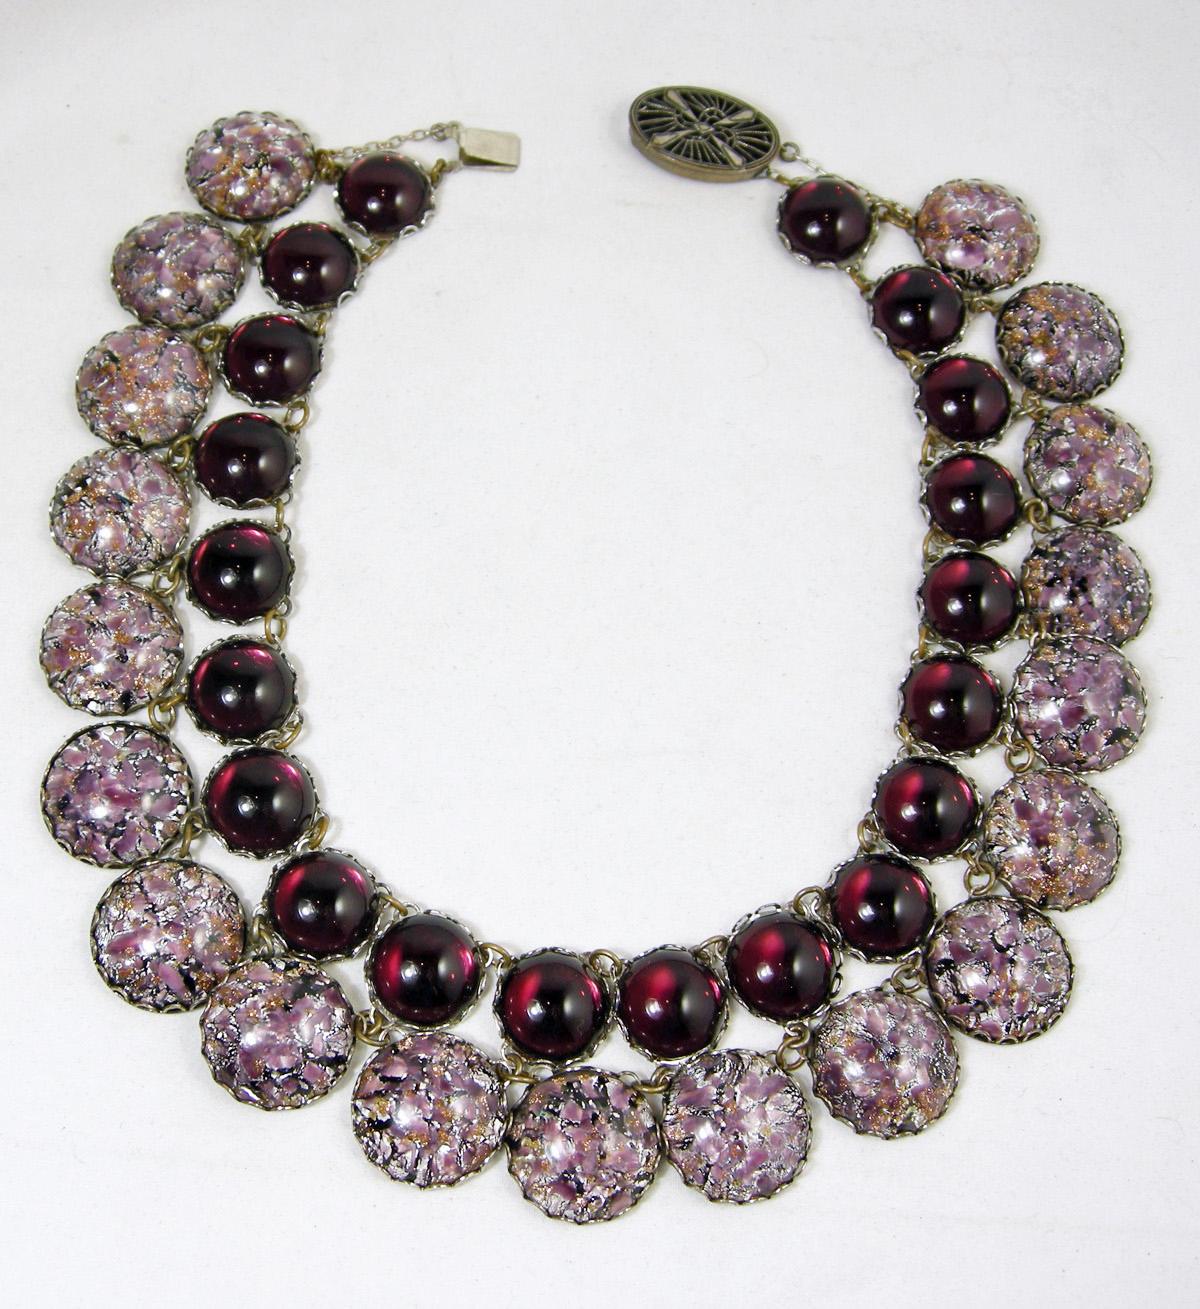 We were fortunate to buy this extremely rare Miriam Haskell necklace from a major collector. It has purple cabochon glass stones and large lavender confetti glass stones that are housed in silver tone cases.  It has an old, oval ornate slide in